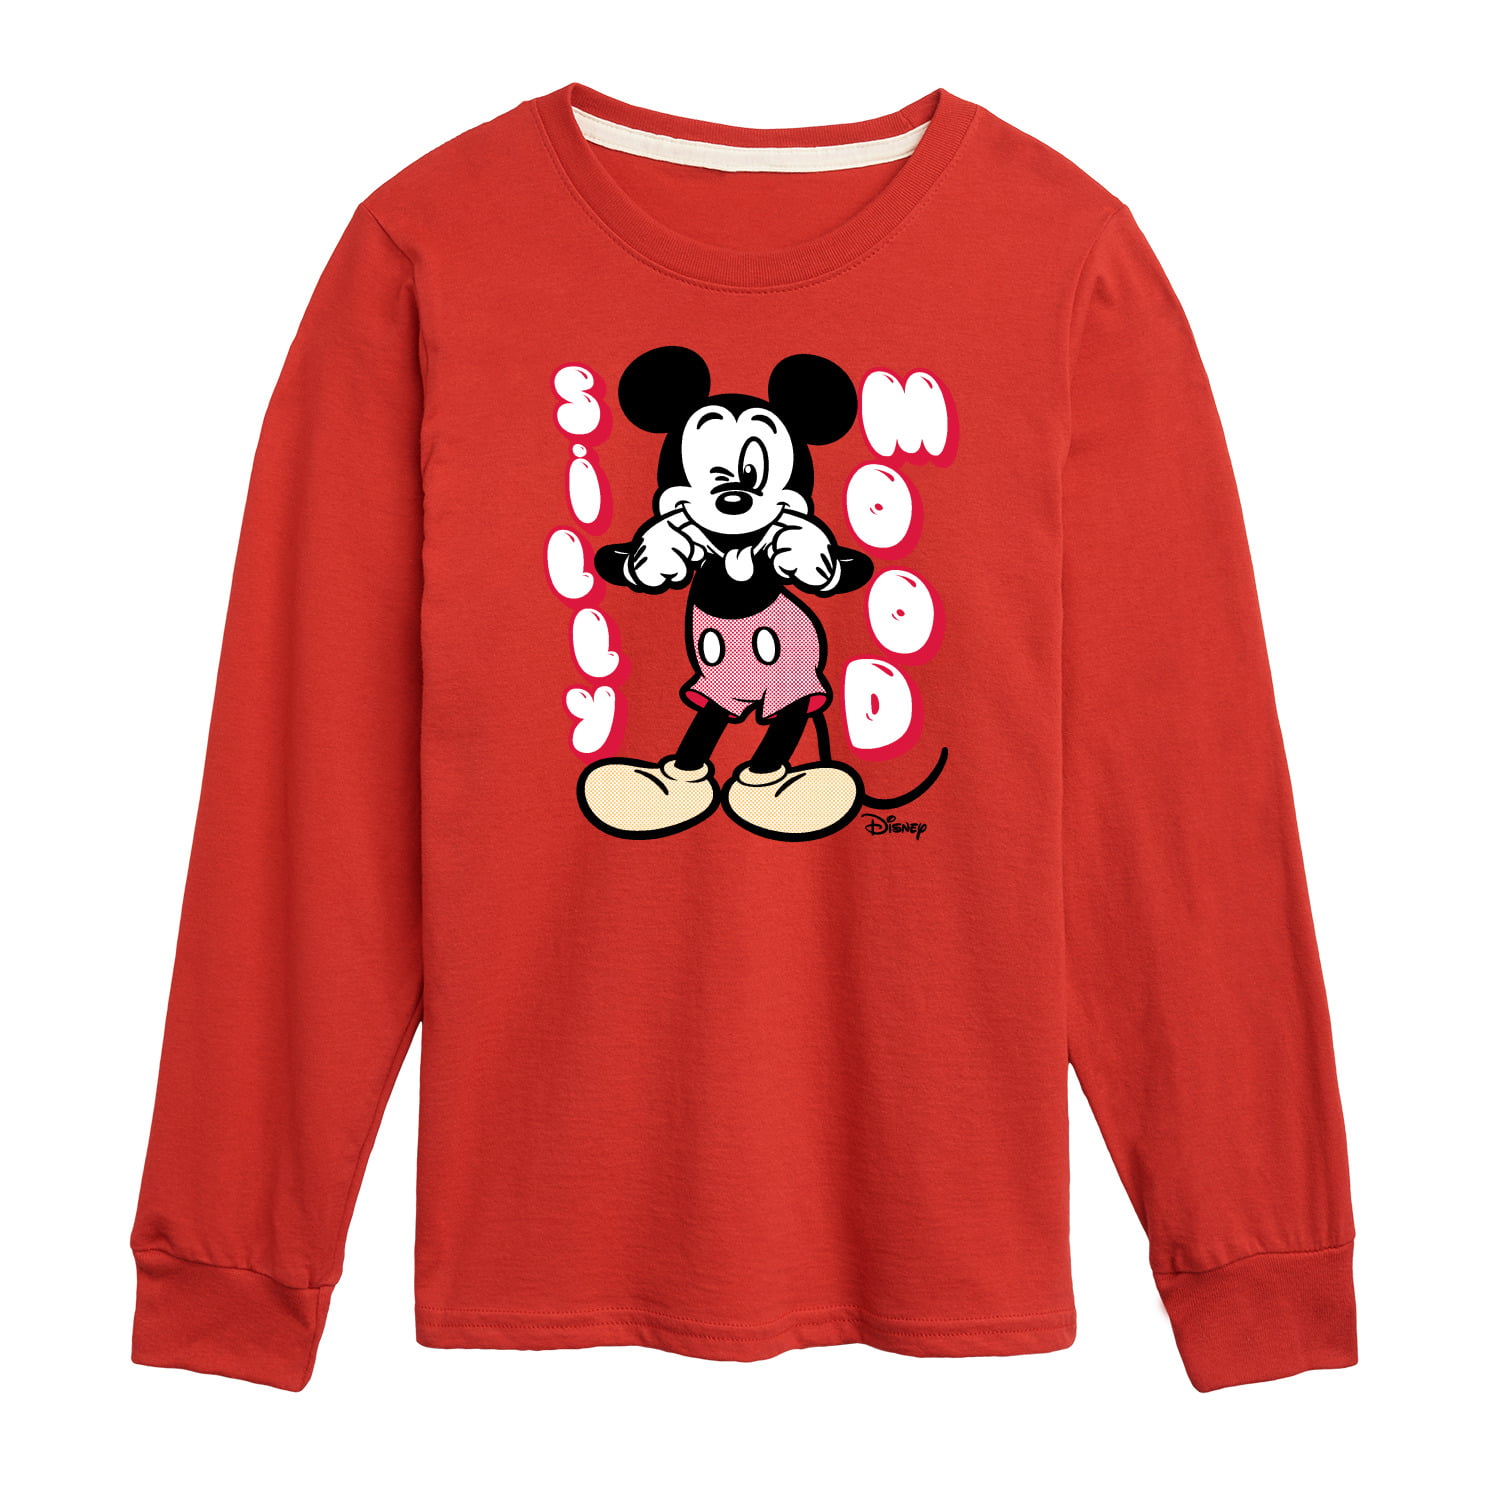 Disney - Mickey & Friends - Silly Mood - Mickey Sticking His Tongue Out -  Toddler And Youth Long Sleeve Graphic T-Shirt